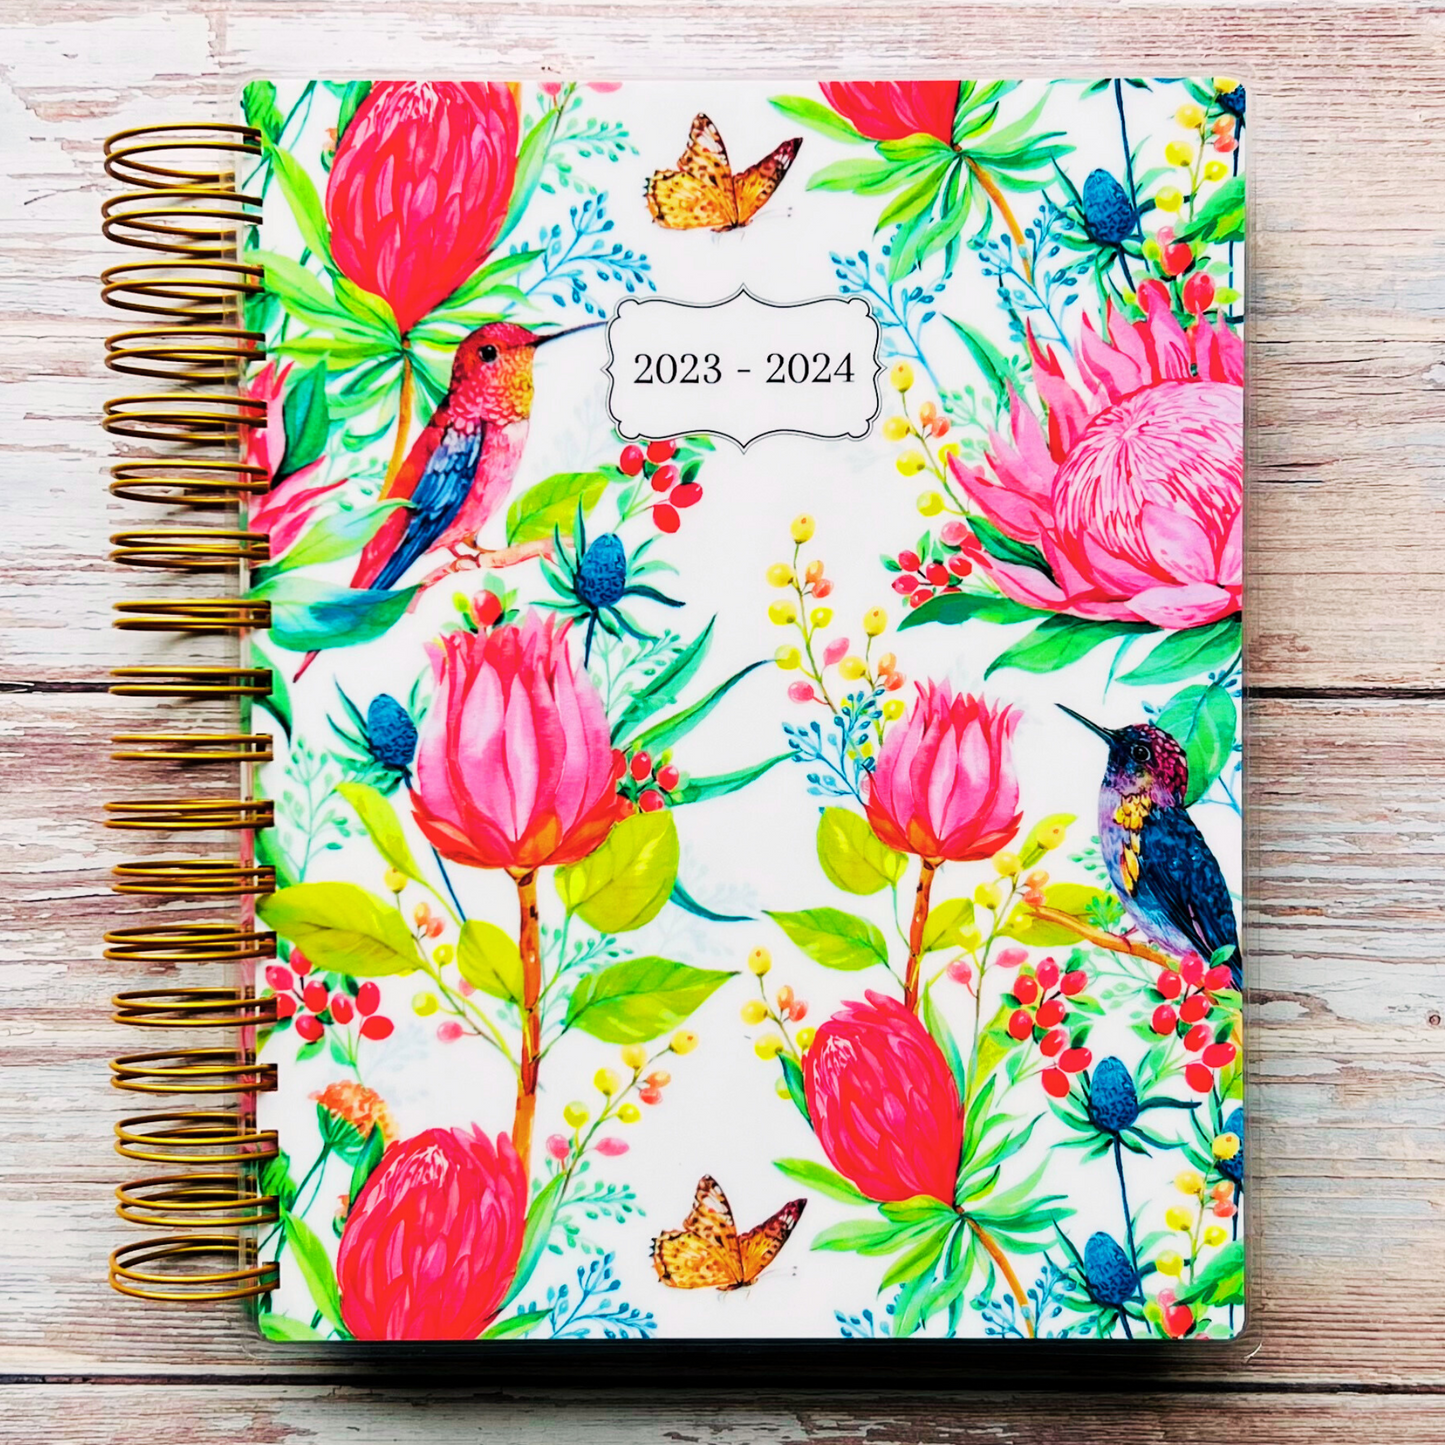 Personalized 6 Month Daily Planner 2023-2024 | Hummingbird Tropical Garden Daily Planners Artful Planner Co. July-2023 20 Meal Planners +$3.00 (added to back) 